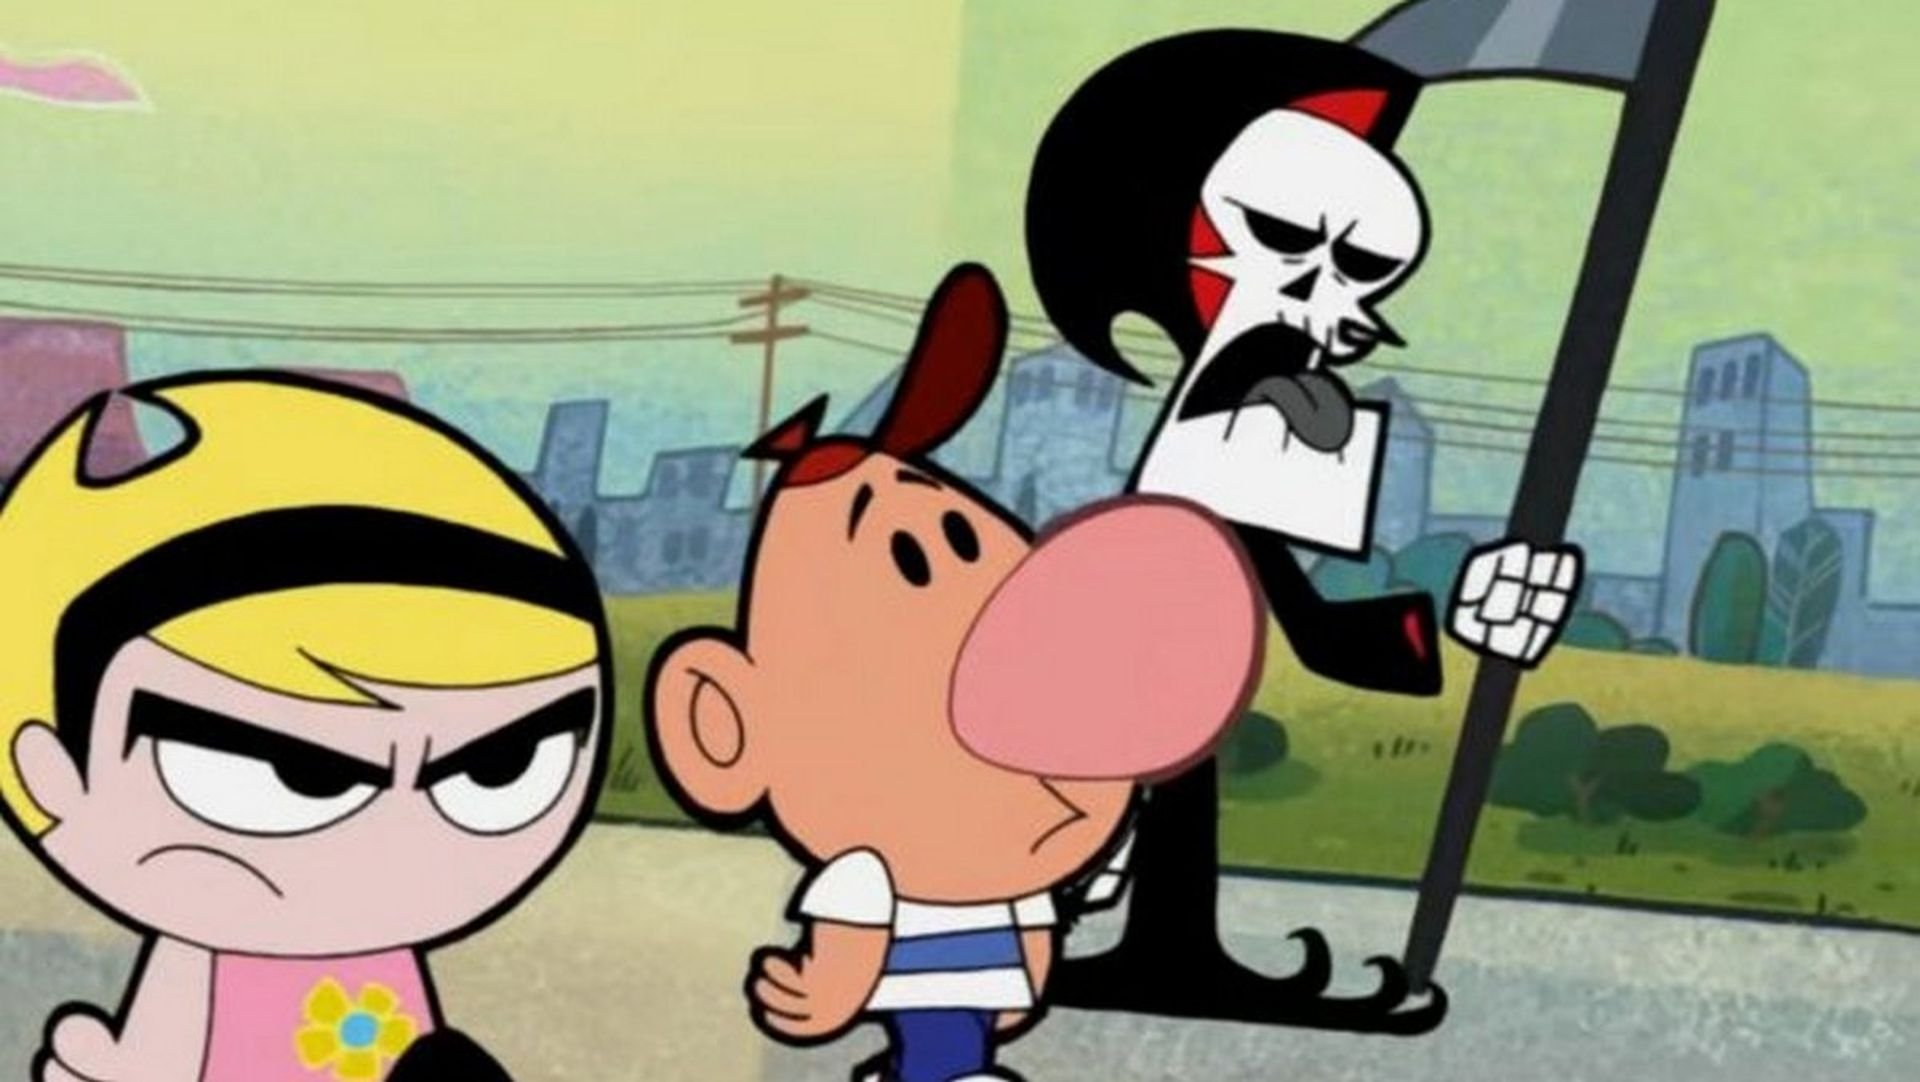 Billy and Mandy Games - Play the Best Billy and Mandy Games